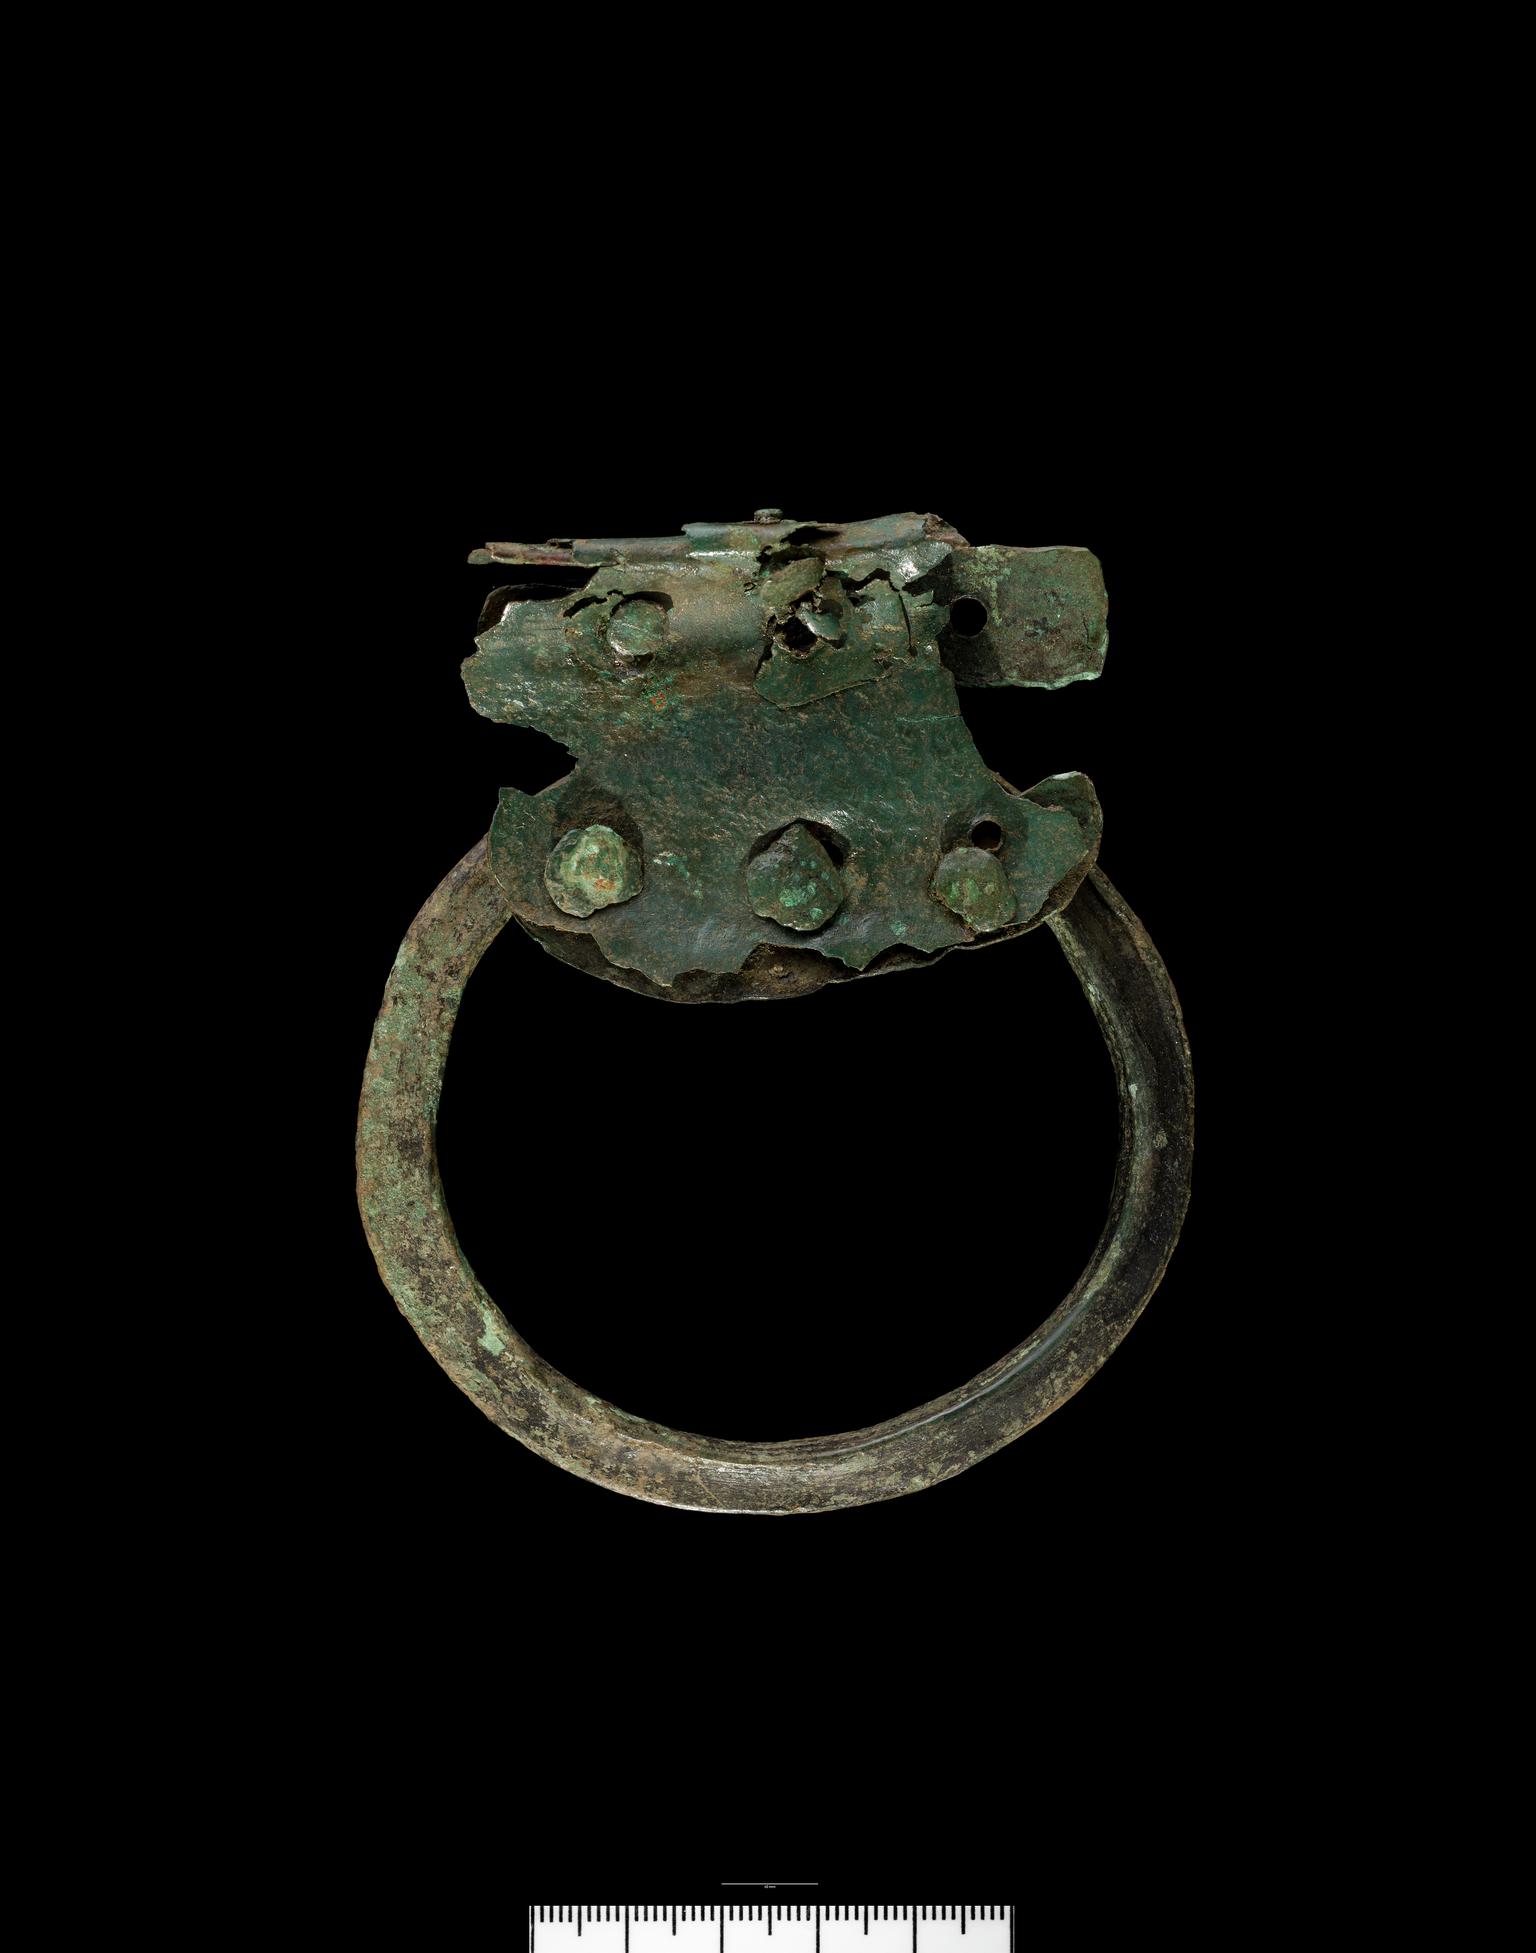 Early Iron Age bronze handle strap